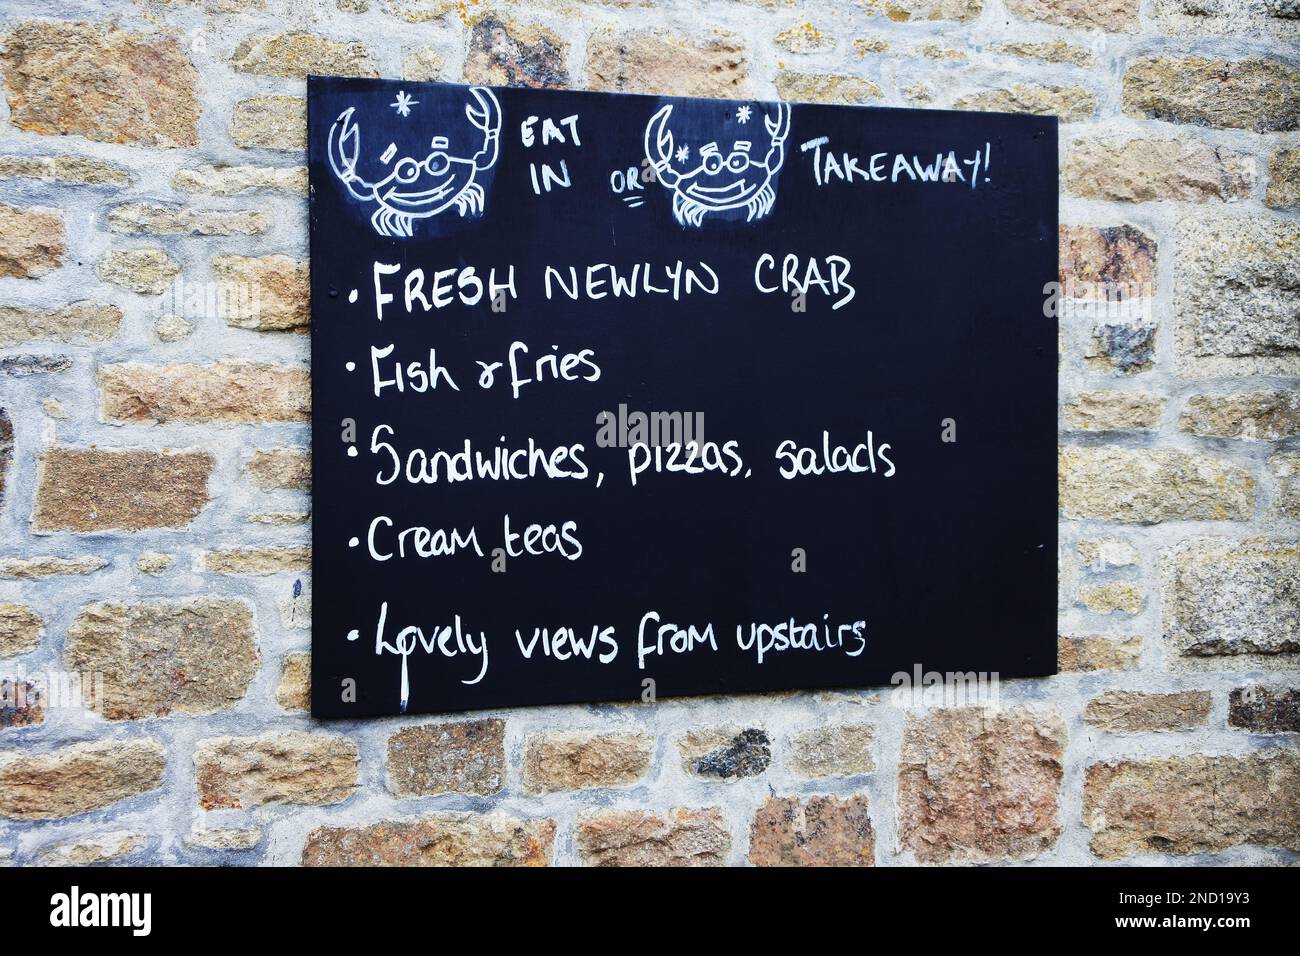 Cafe menu on a stone wall at Marazion.Marazion is the hub village for visiting St. Michael's Mount, Cornwall, UK - John Gollop Stock Photo